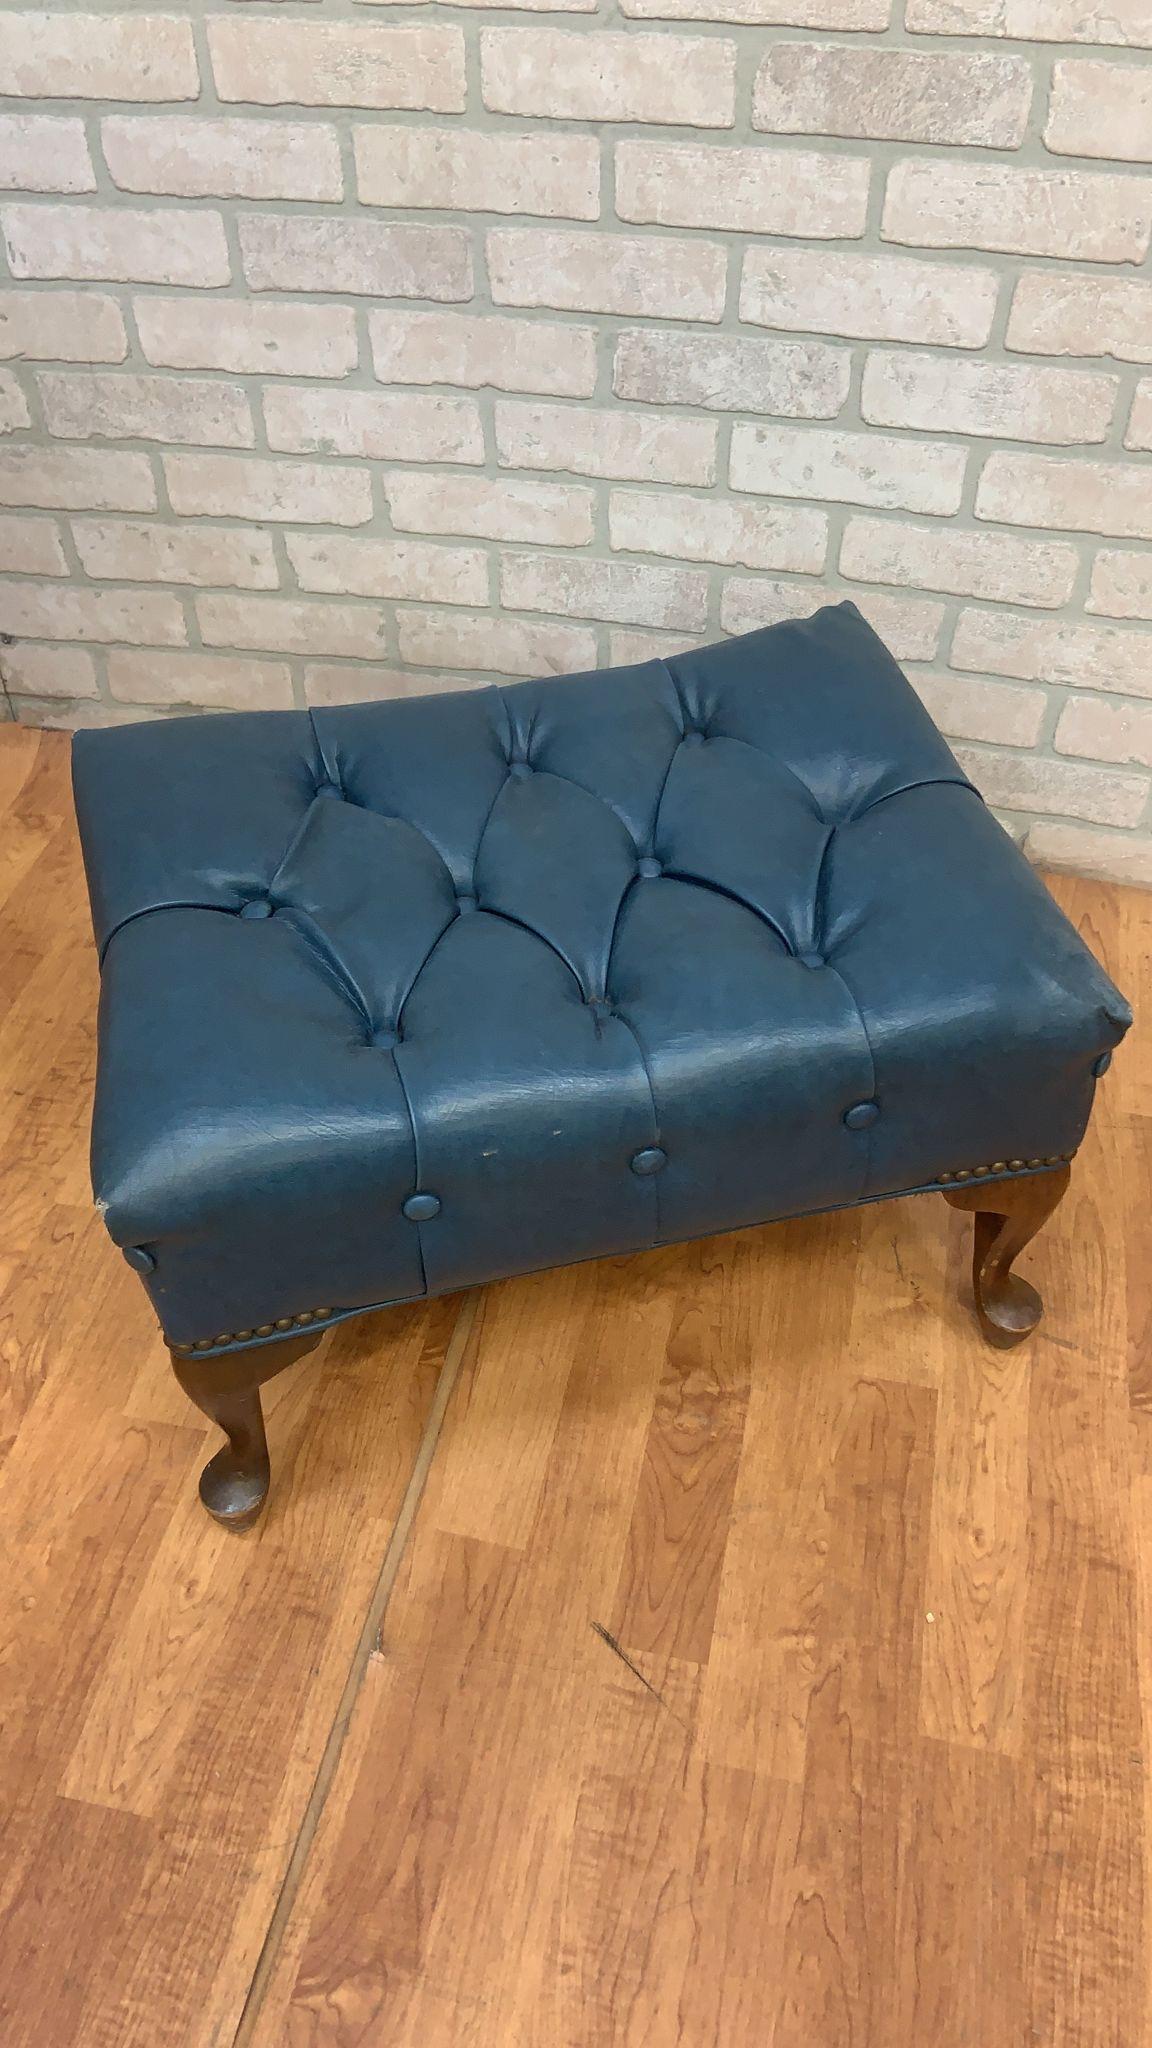 Mid-20th Century Vintage Sleepy Hollow Blue Tufted Chair and Ottoman - 2 Piece Set